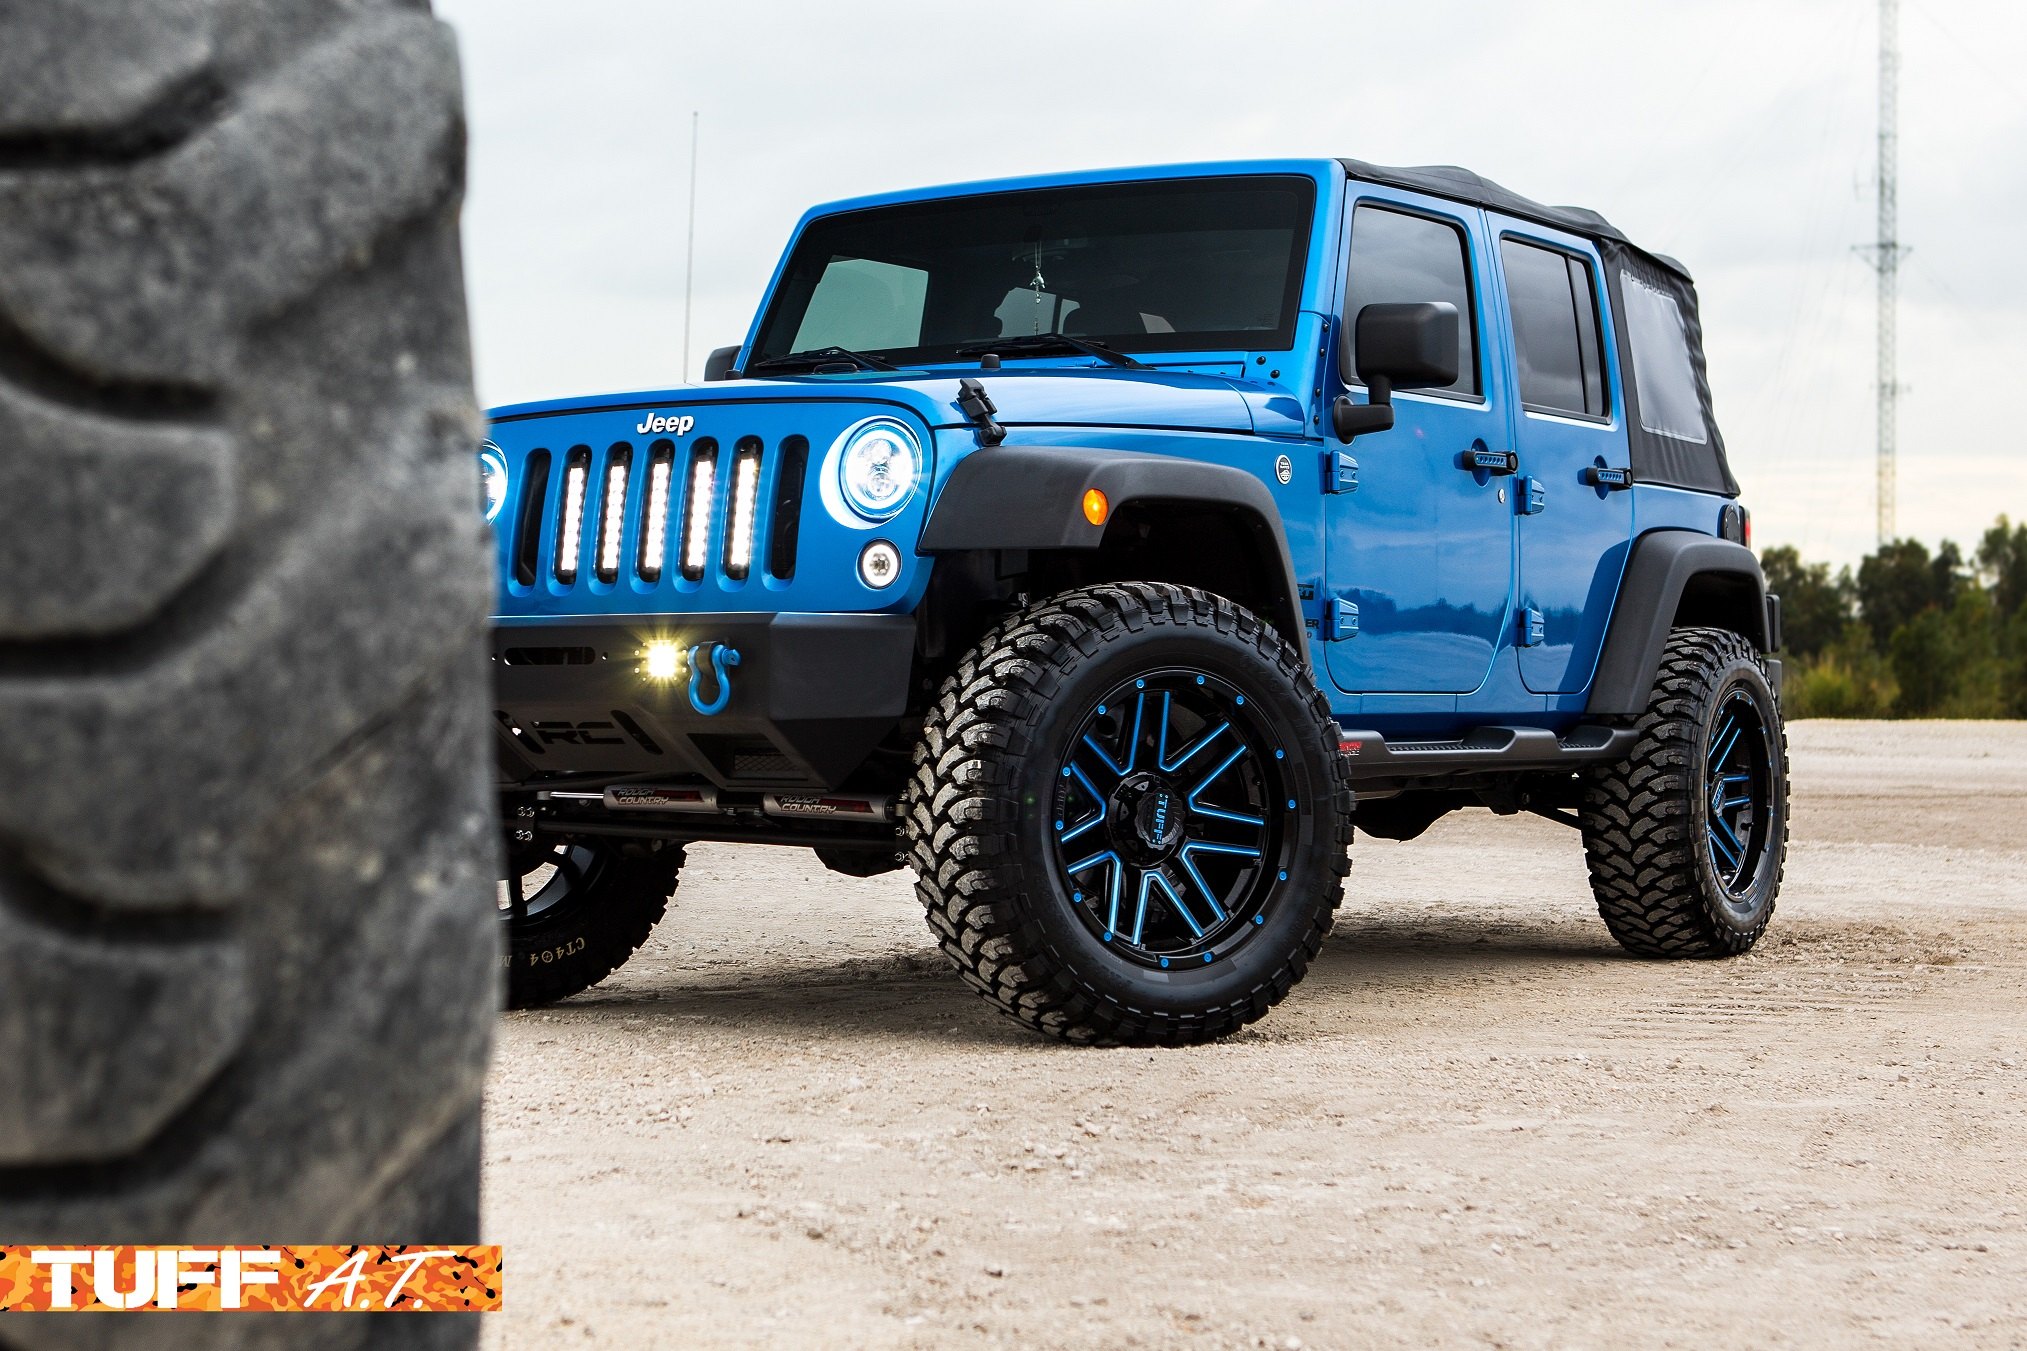 JK Wrangler lifted on 20» off-road rims - Photo by Tuff